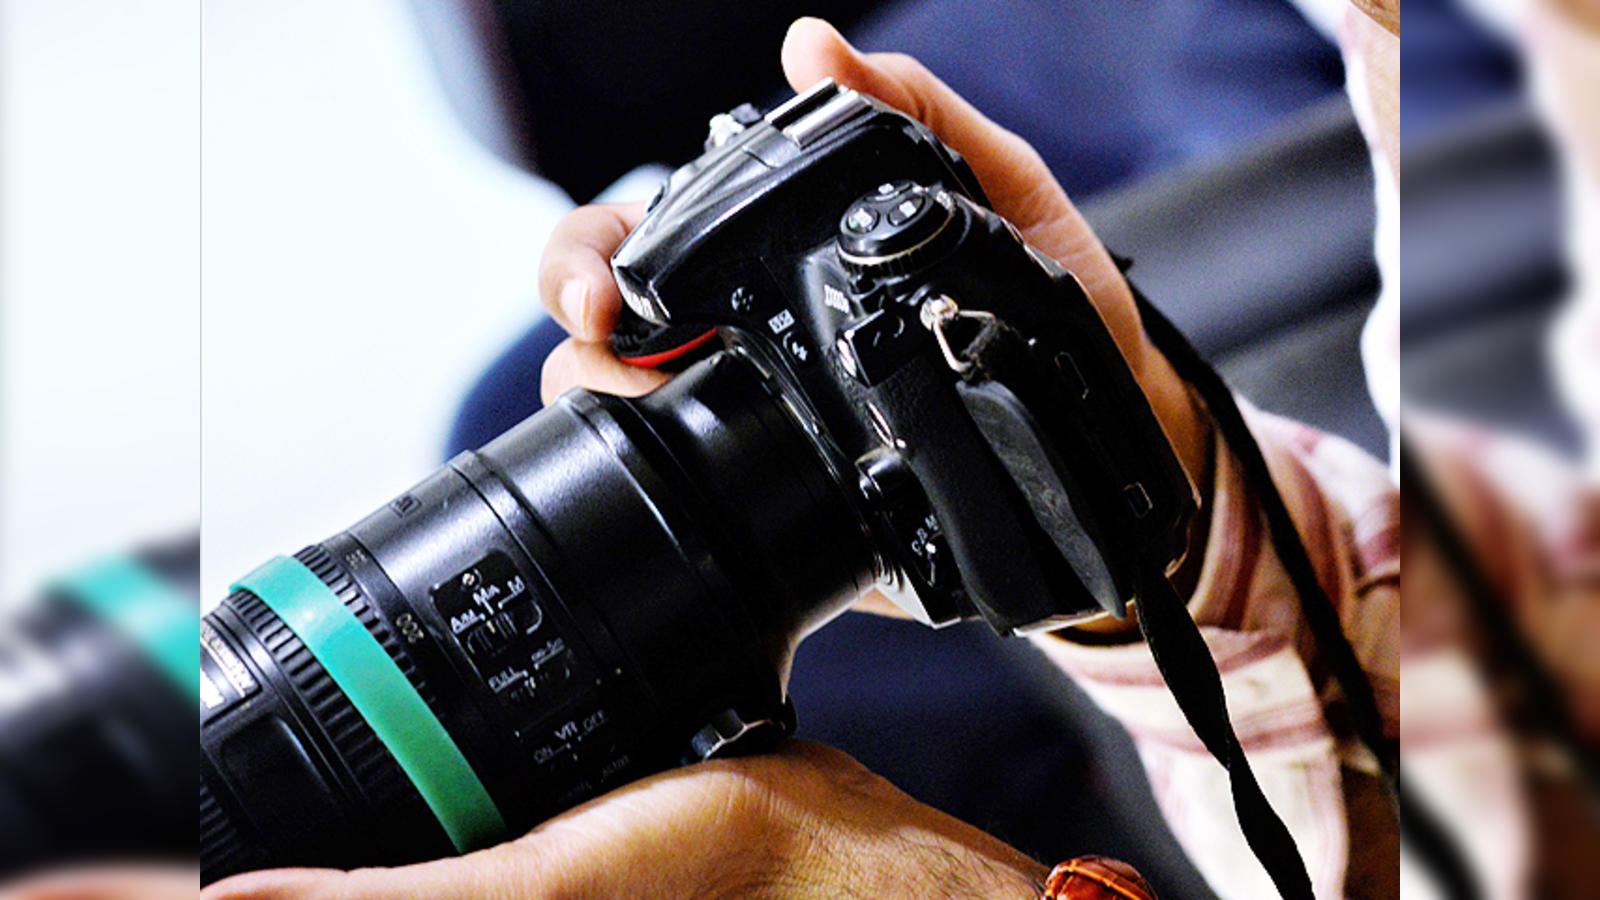 DSLR Camera: Planning to buy a DSLR camera? Here's a crash course